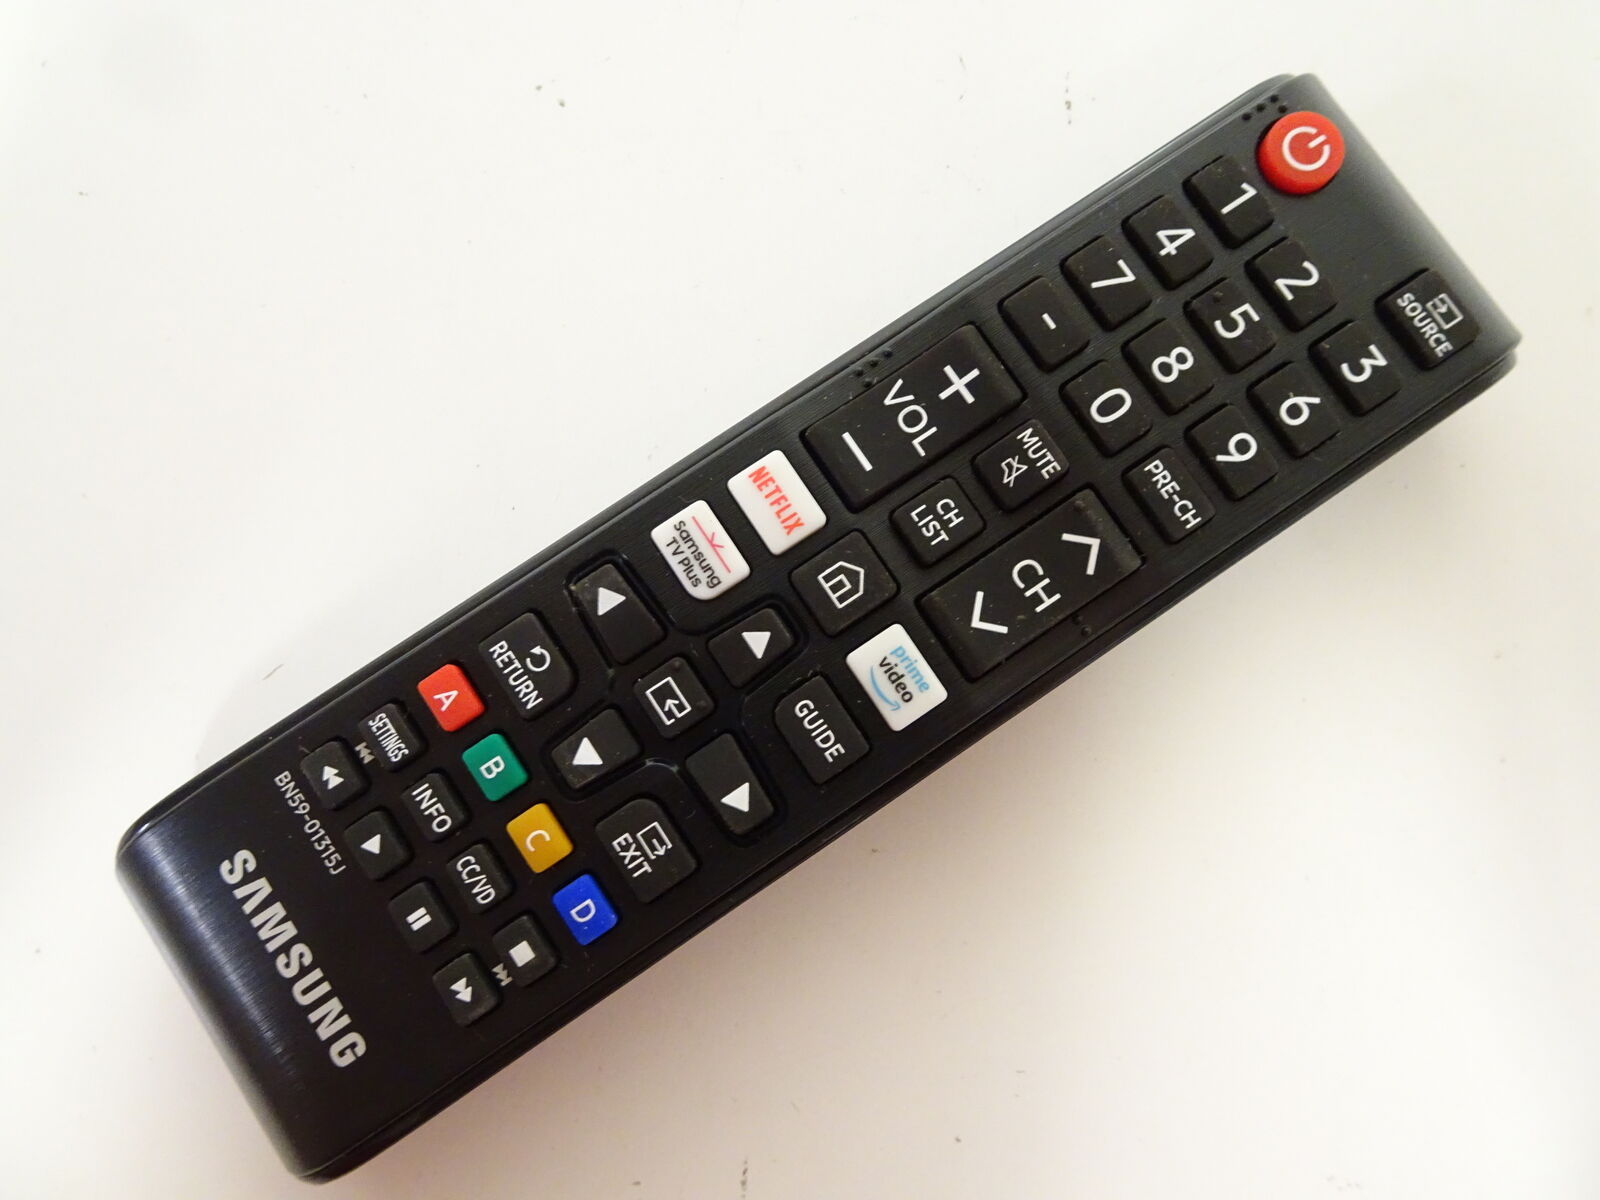 What Is The Remote Code For A Samsung Smart TV